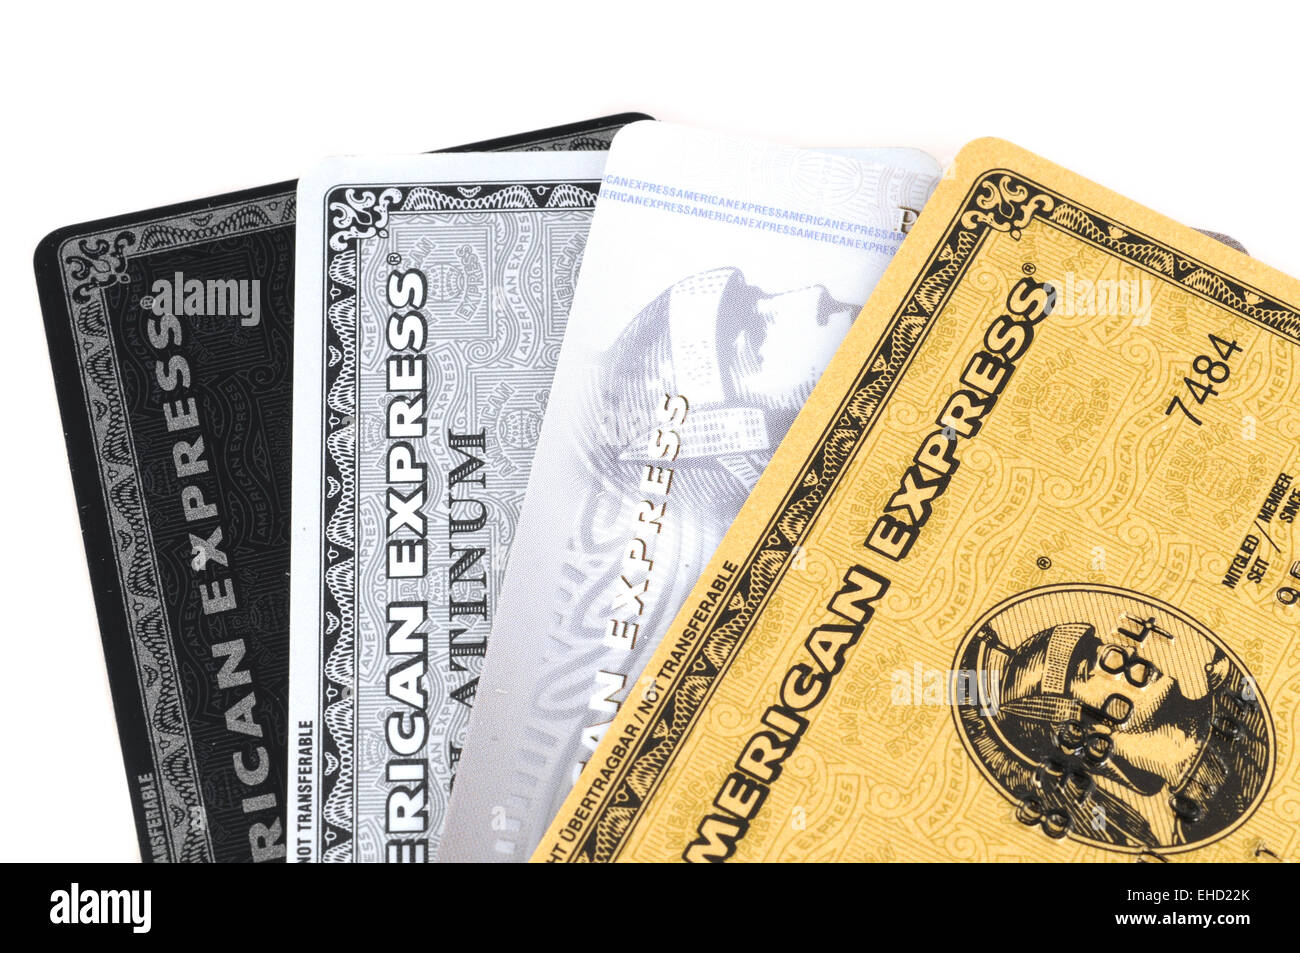 American Express Black Card High Resolution Stock Photography And Images Alamy